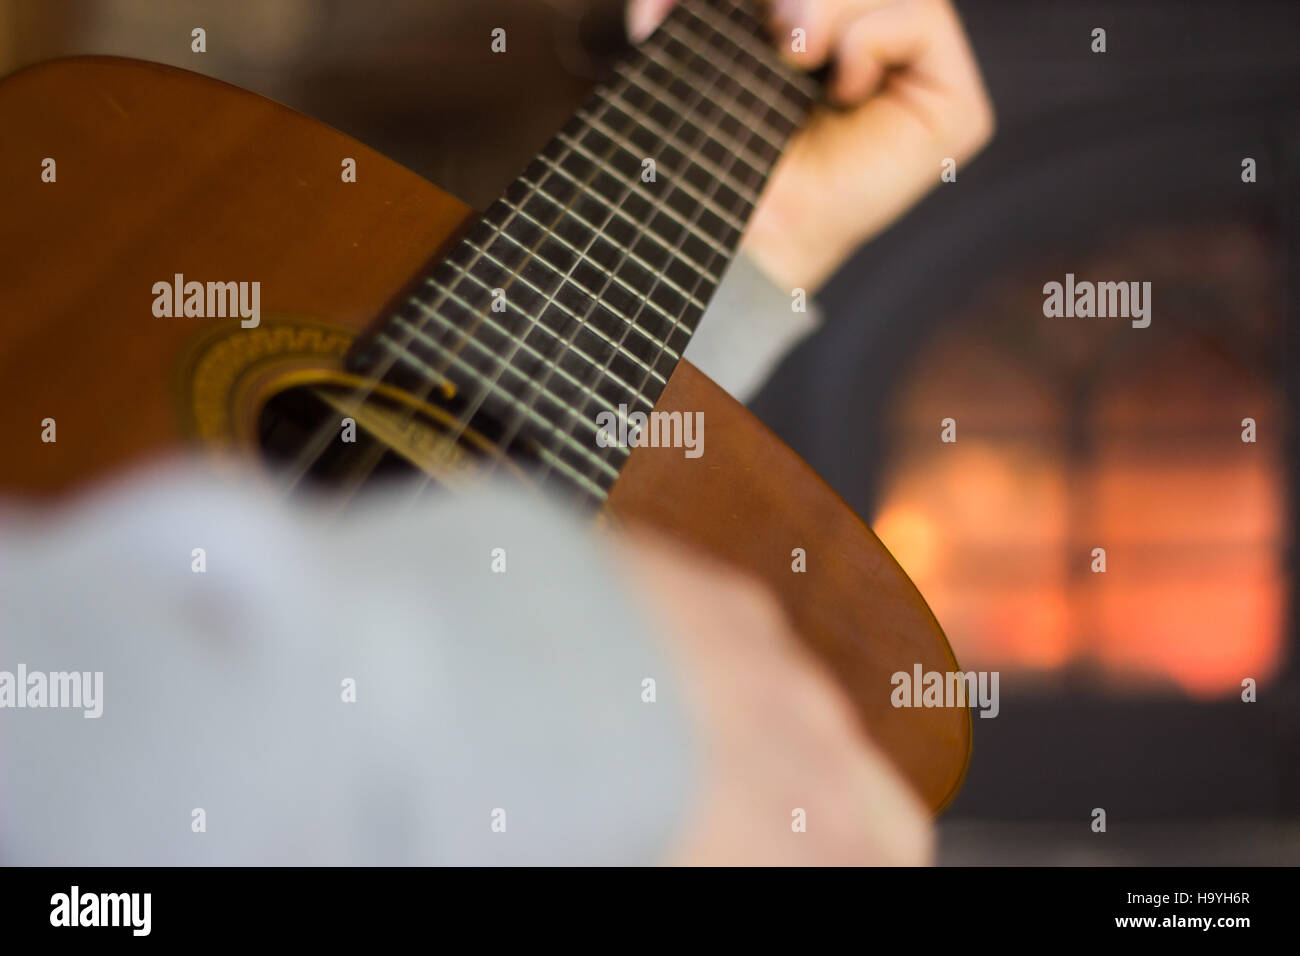 Man playing guitar in front of fireplace Stock Photo